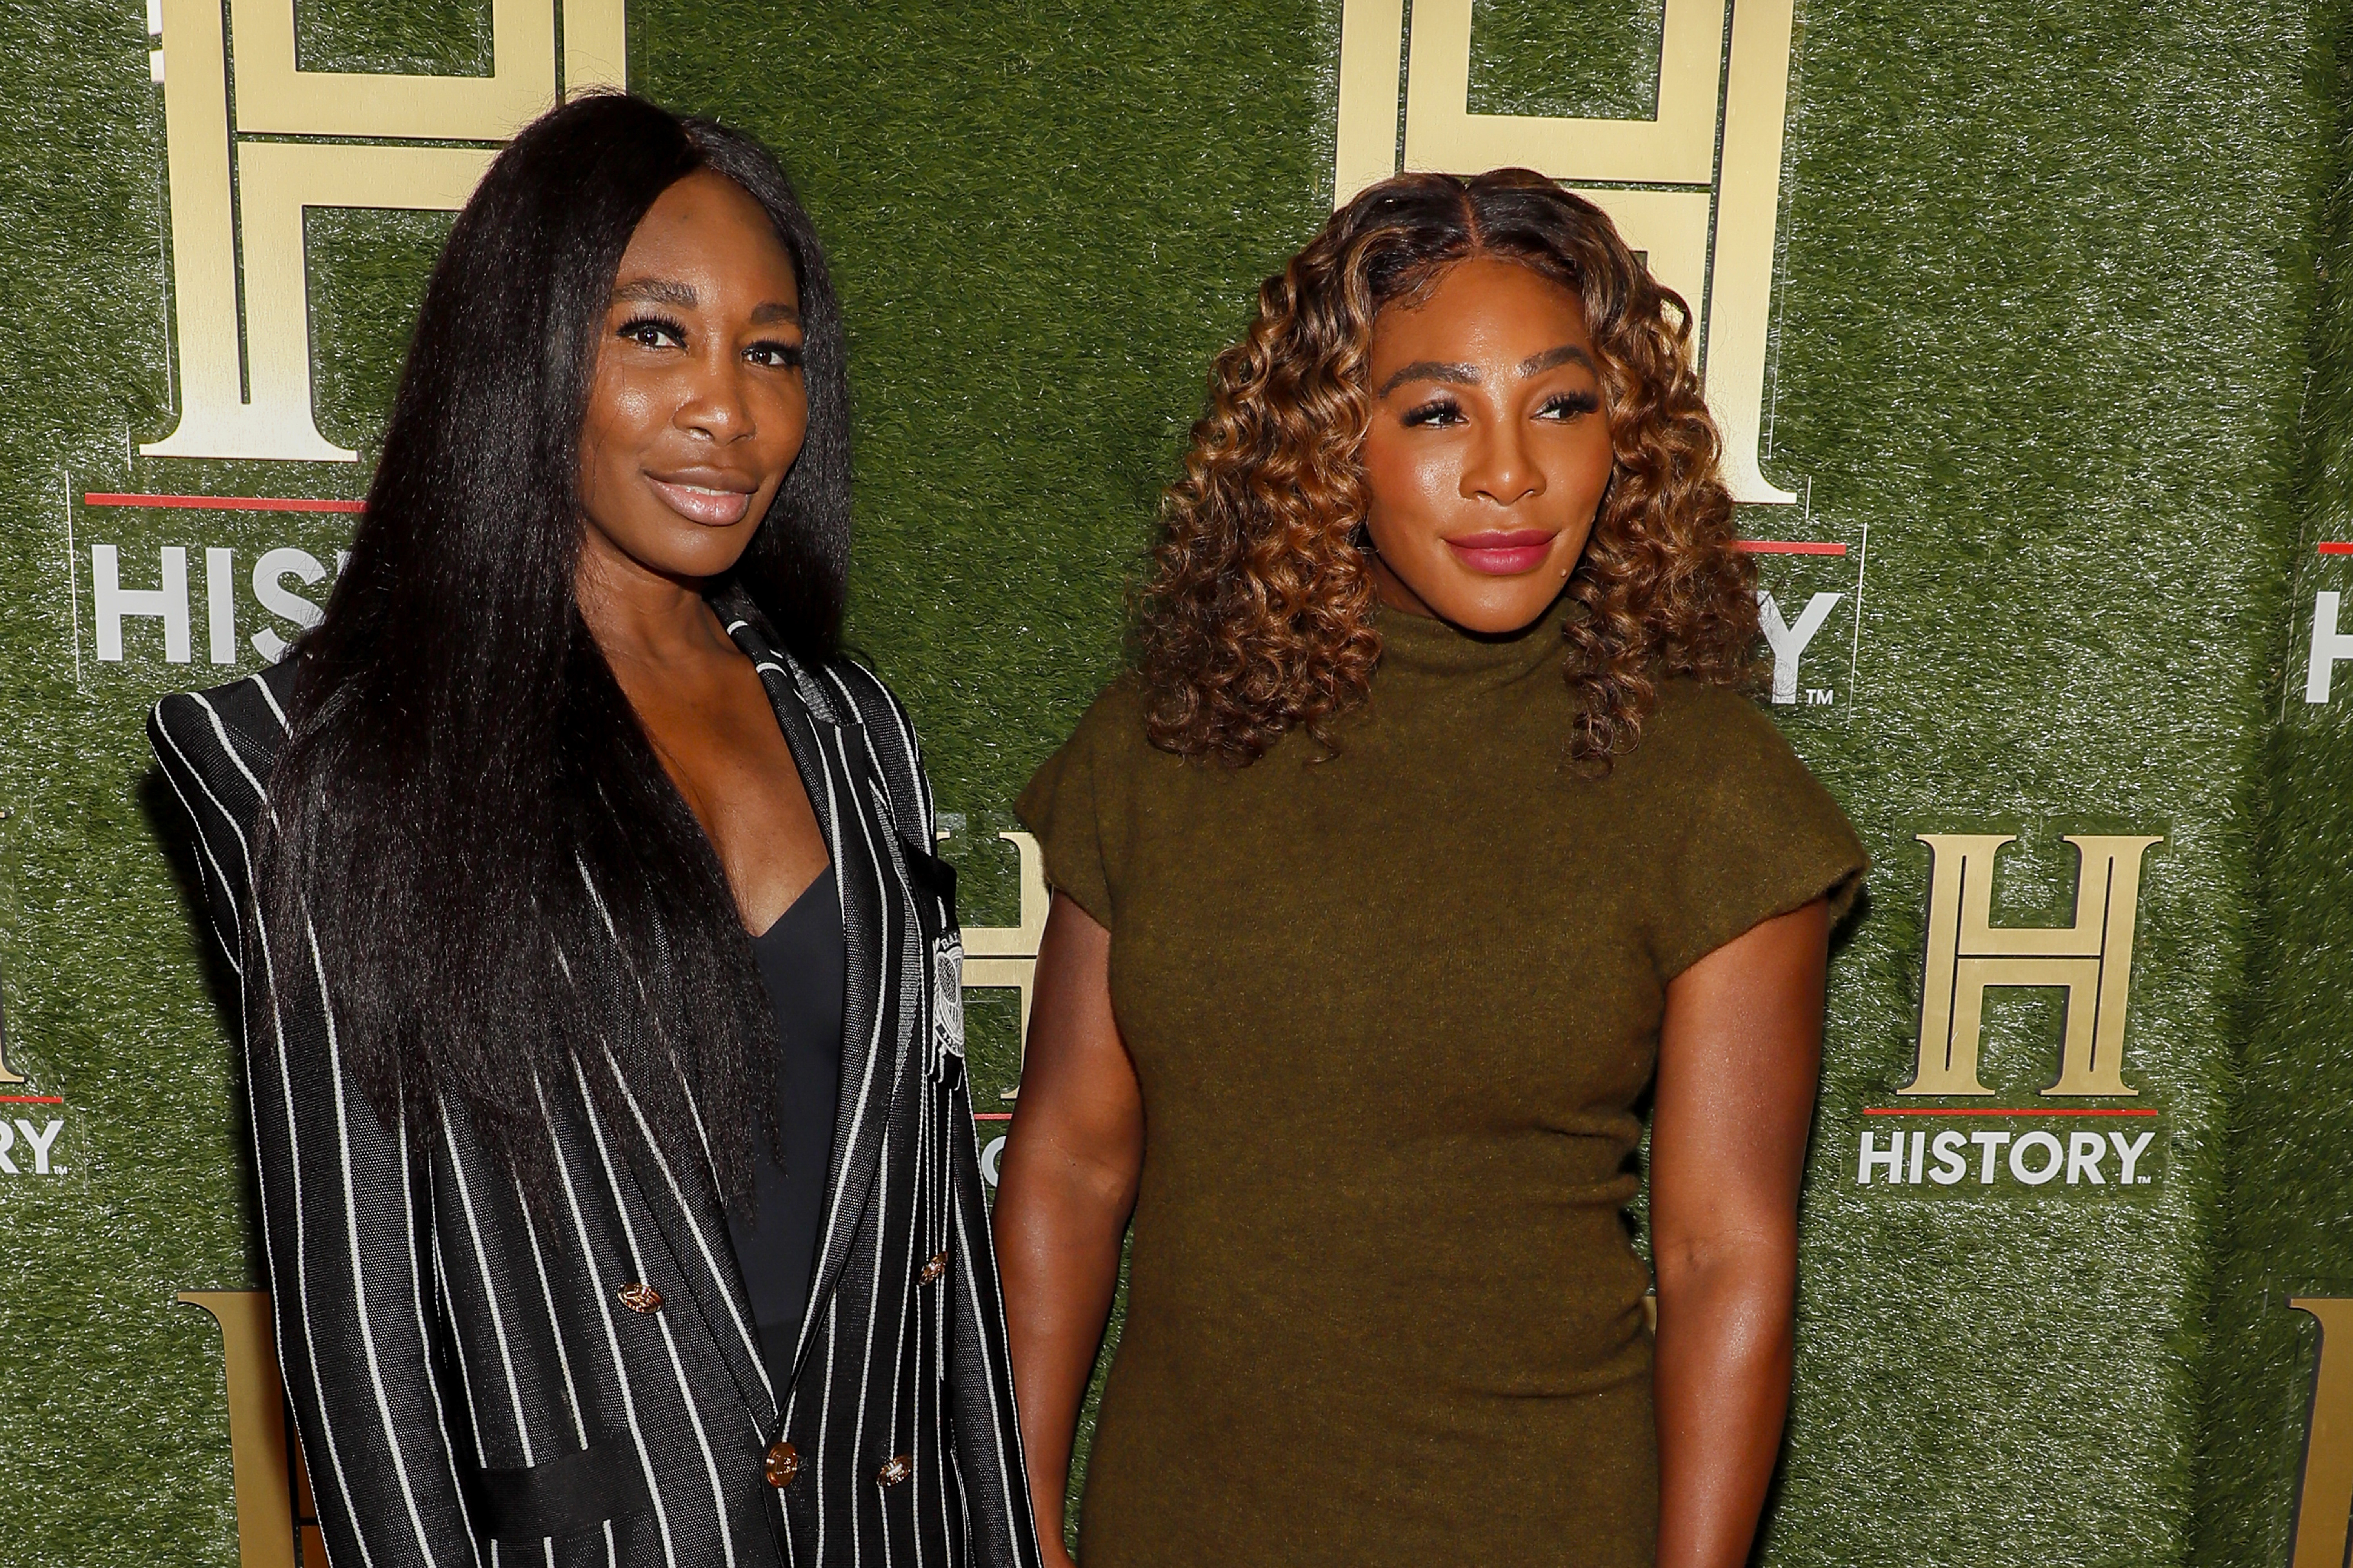 Venus Williams and Serena Williams on September 24, 2022 in Washington, D.C. | Source: Getty Images